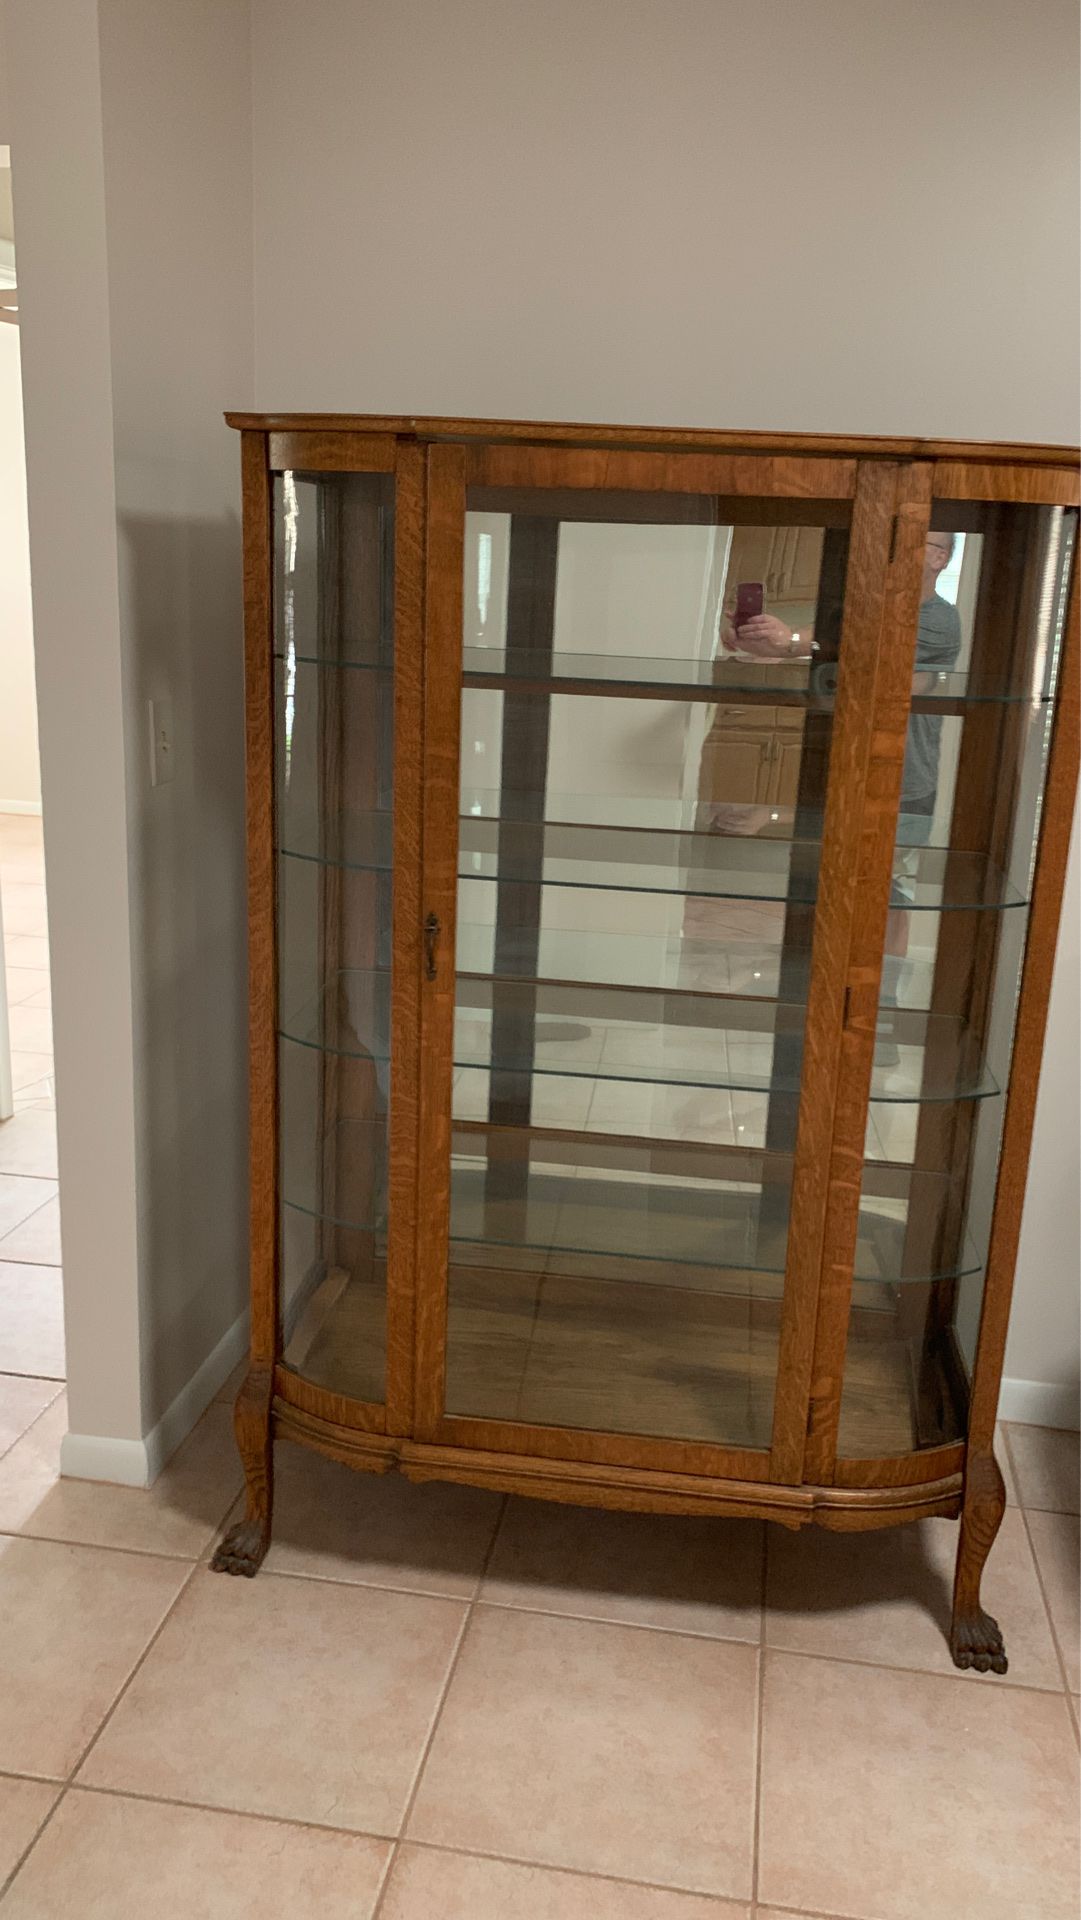 Antique China Cabinet. Good condition